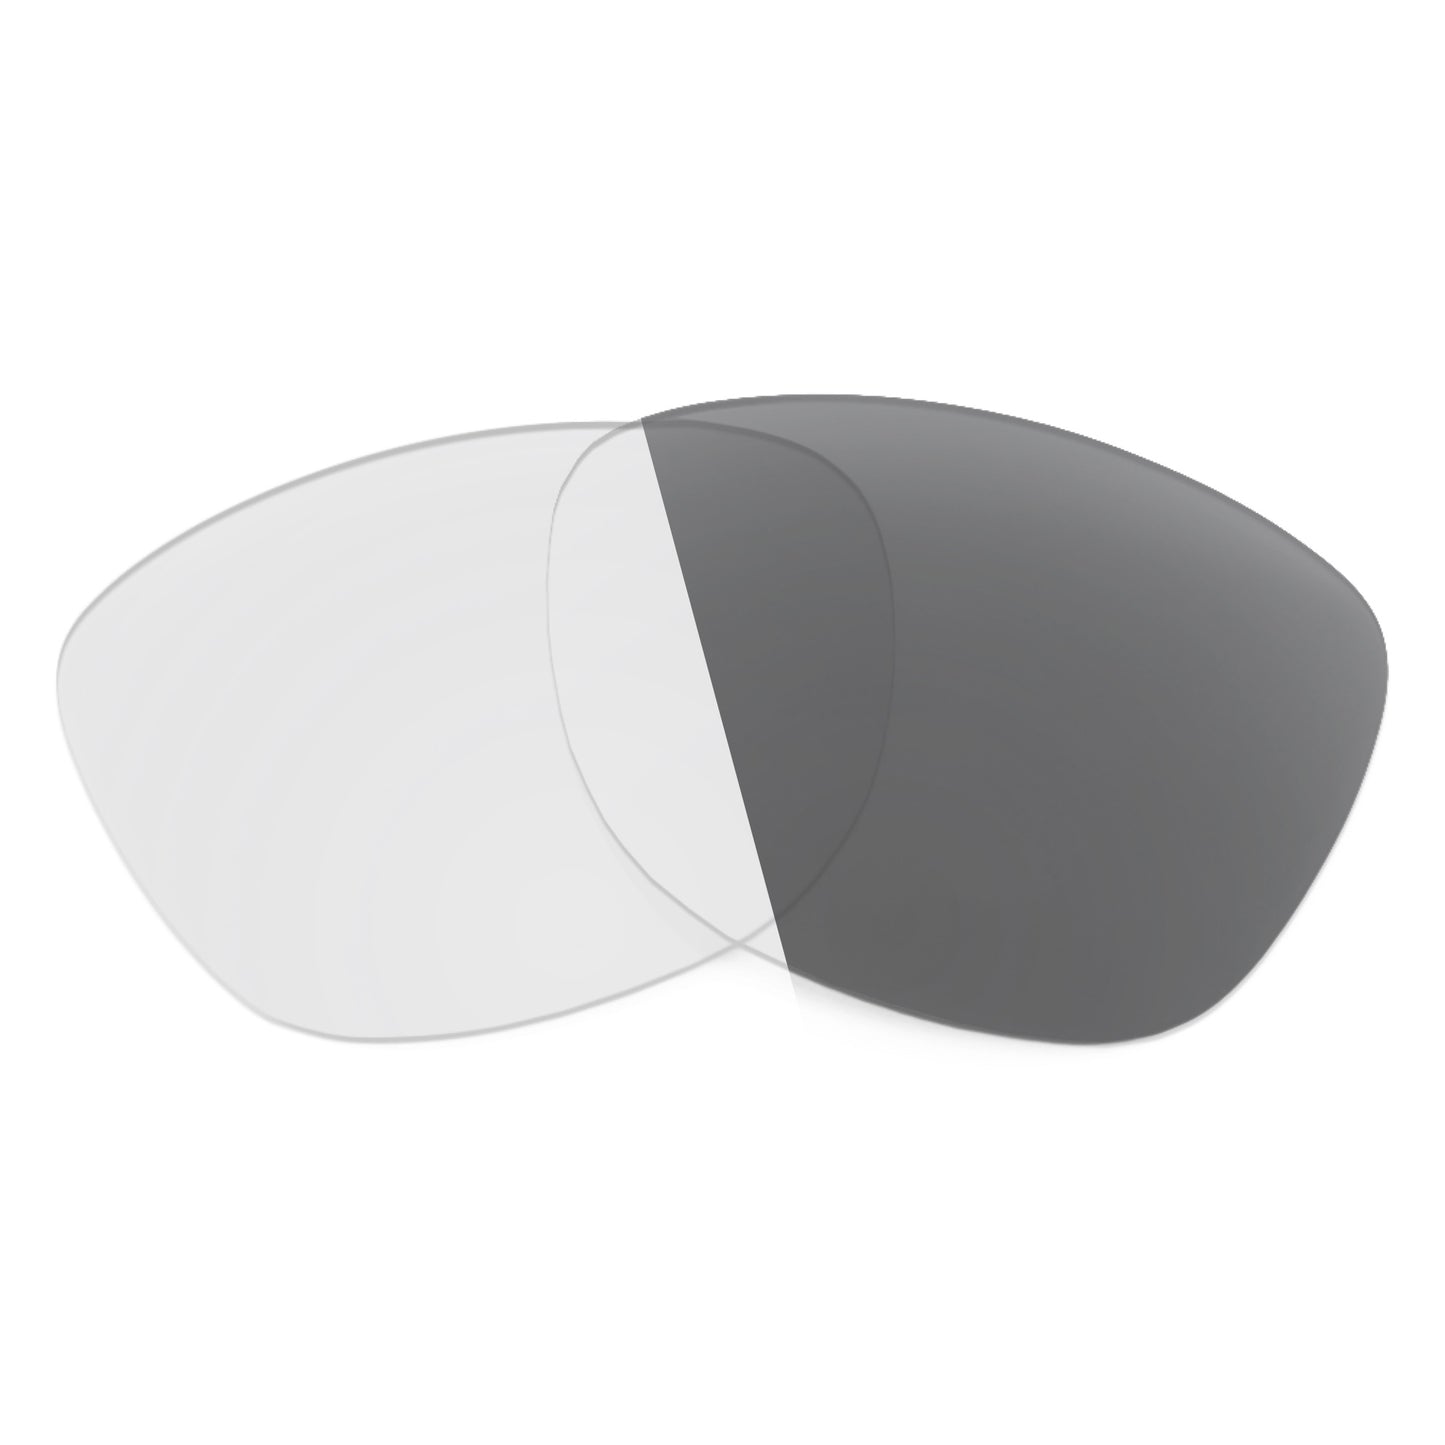 Revant replacement lenses for Ray-Ban RB3546 49mm Non-Polarized Adapt Gray Photochromic